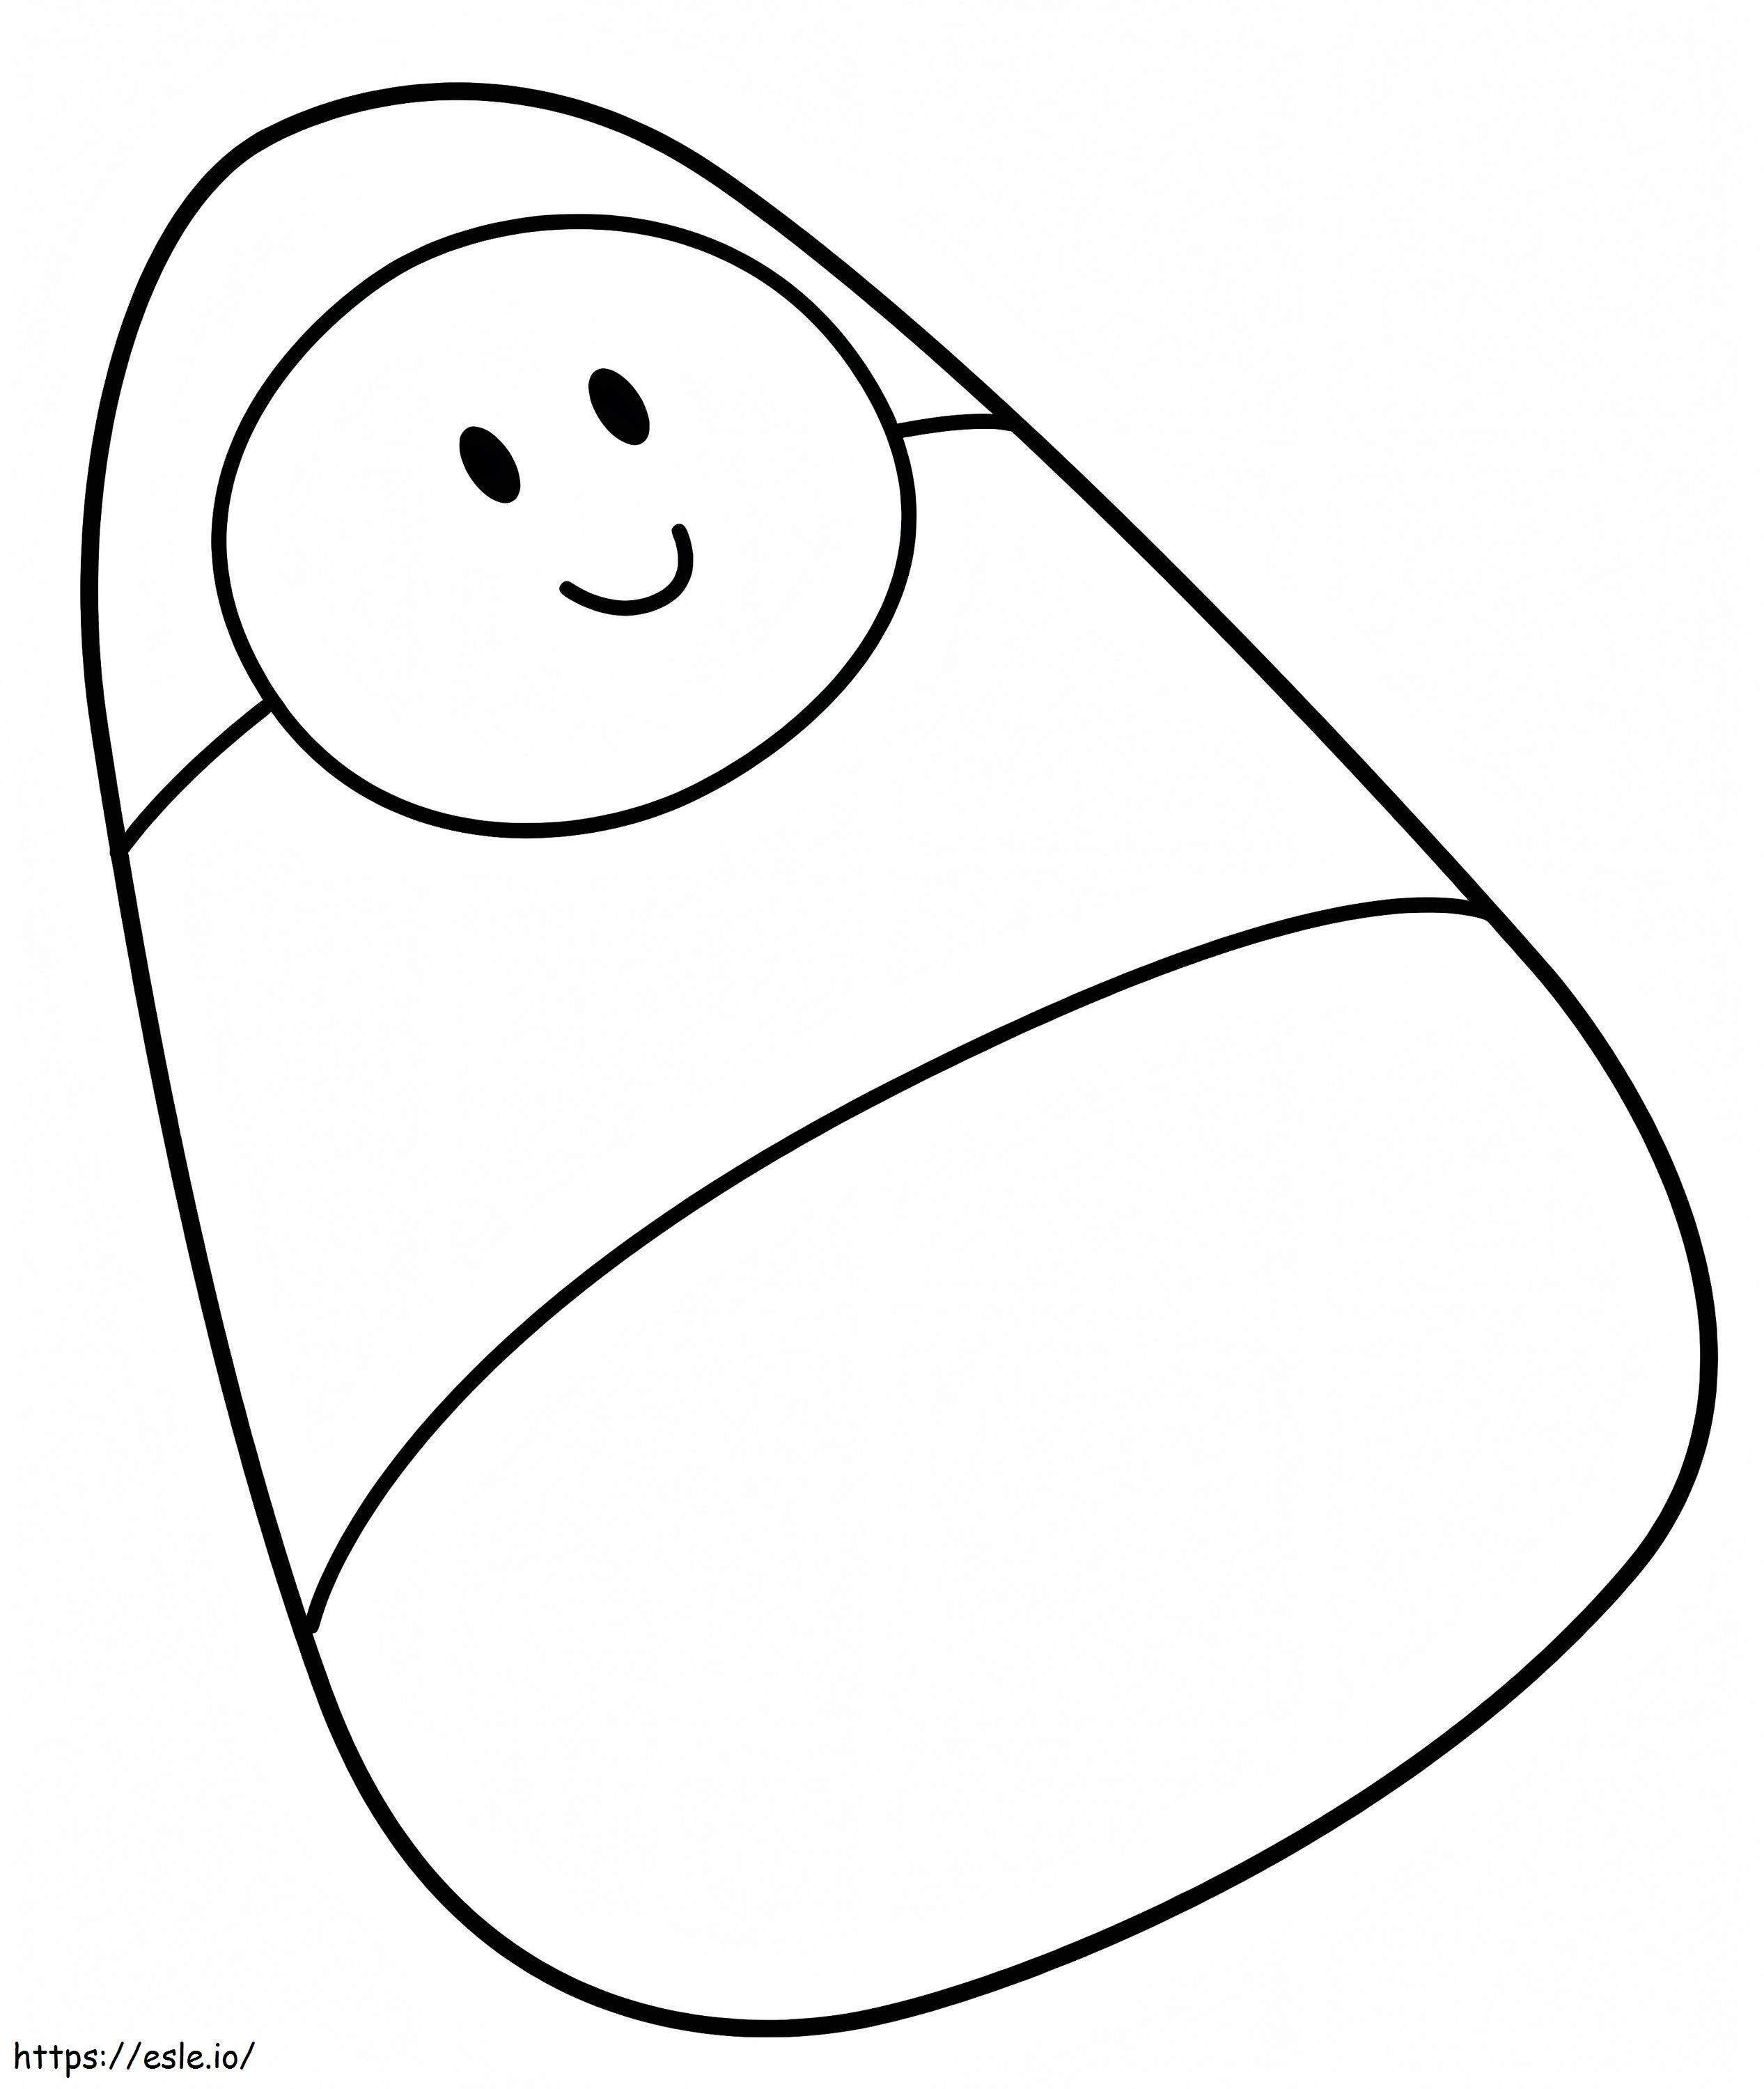 Baby Candy Corn coloring page